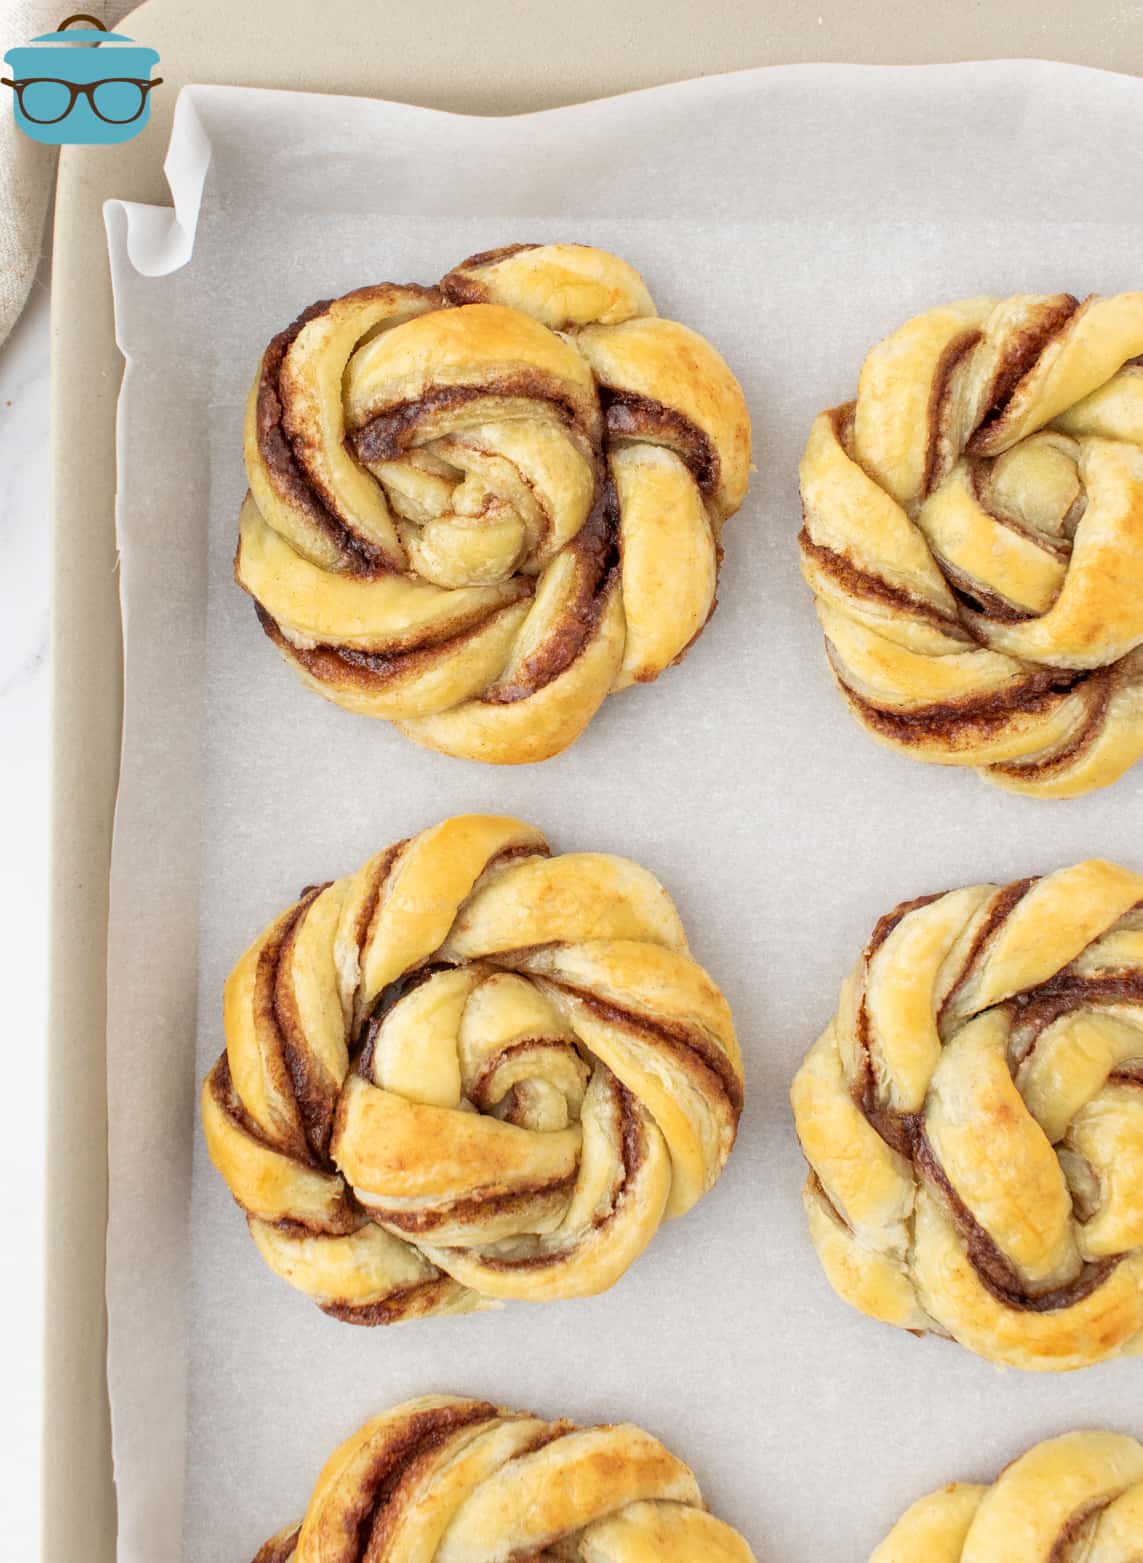 fully baked cinnamon knots shown on a baking sheet. 